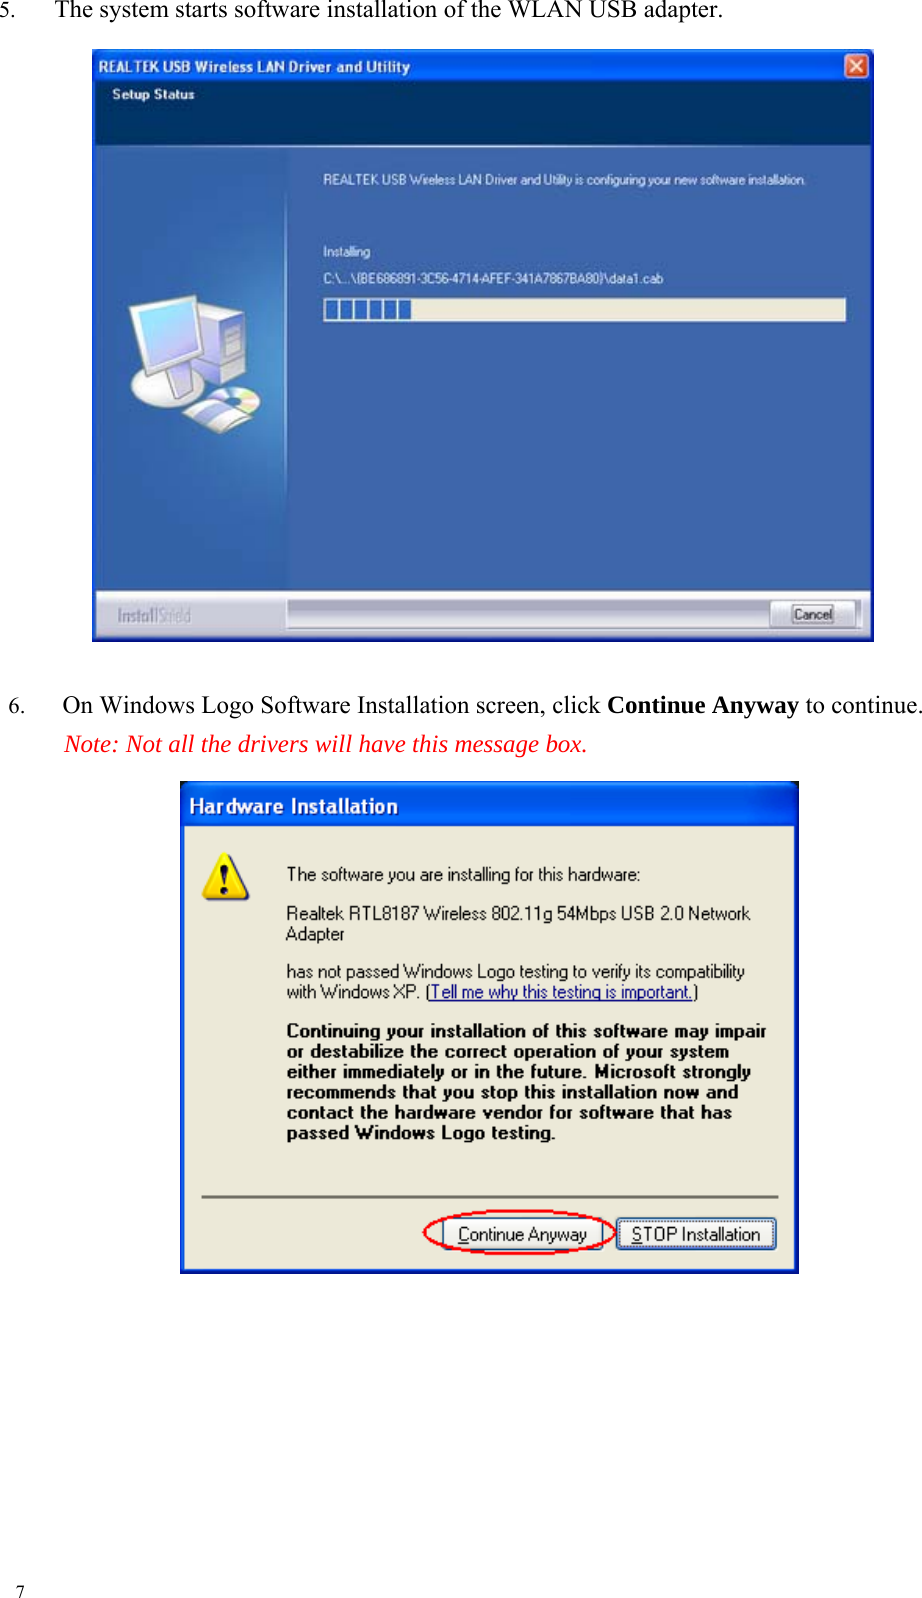  5.  The system starts software installation of the WLAN USB adapter.                              6.  On Windows Logo Software Installation screen, click Continue Anyway to continue.    Note: Not all the drivers will have this message box.                                      7 